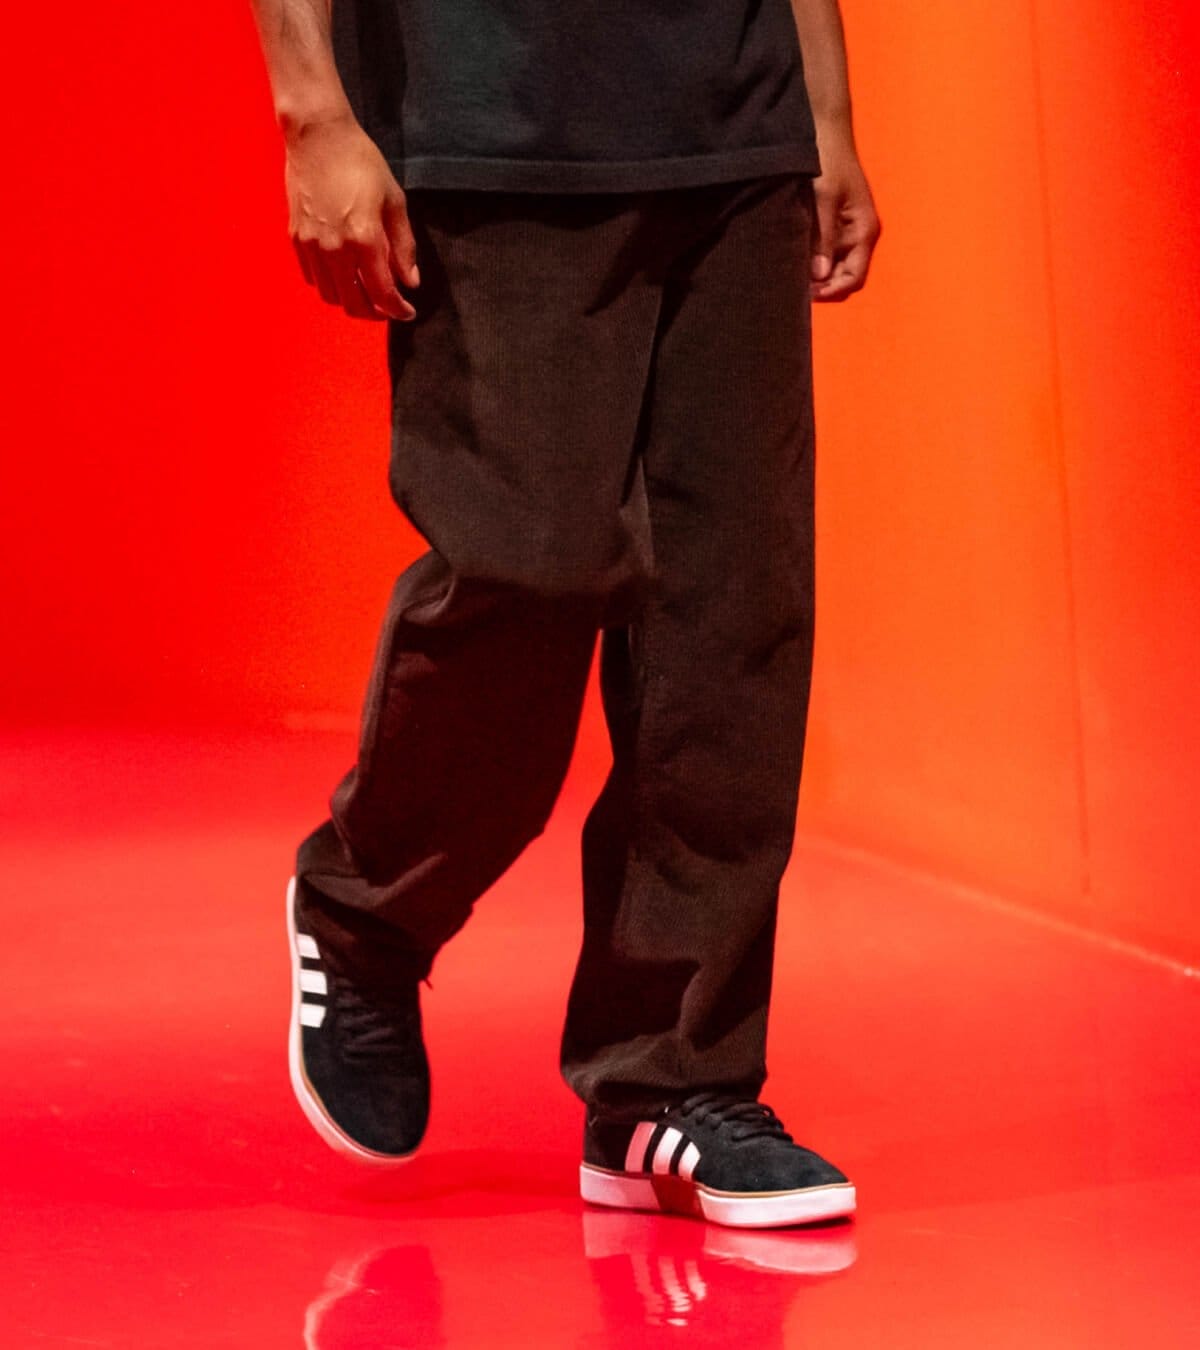 Man wearing brown corduroy Empyre branded pants in an all red room